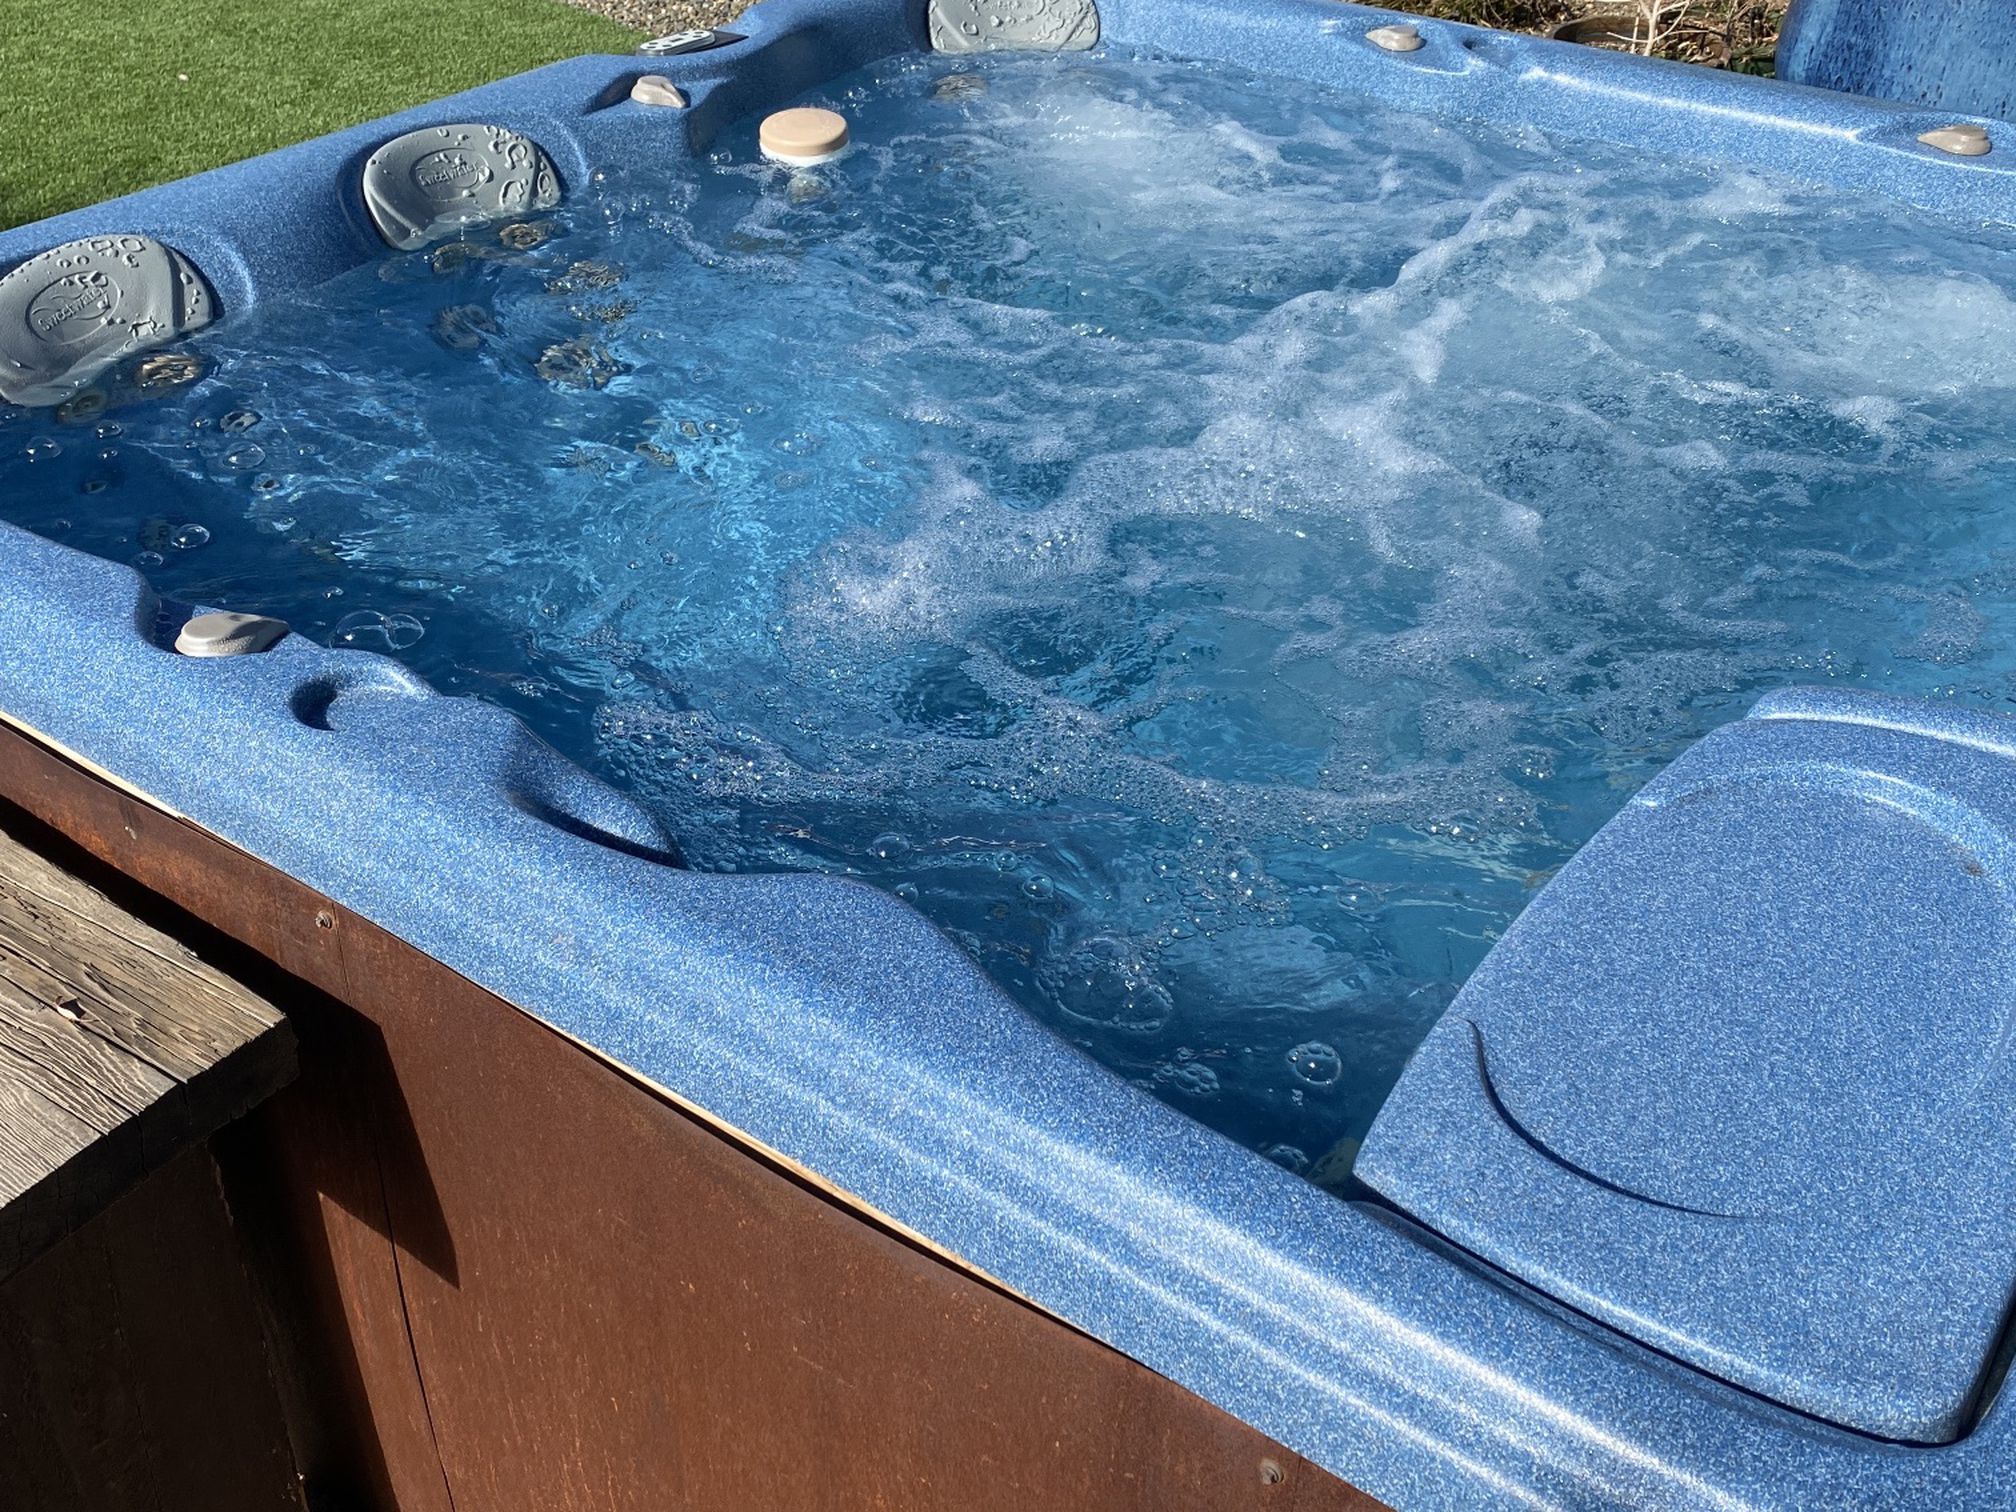 Hot Tub In Great Shape